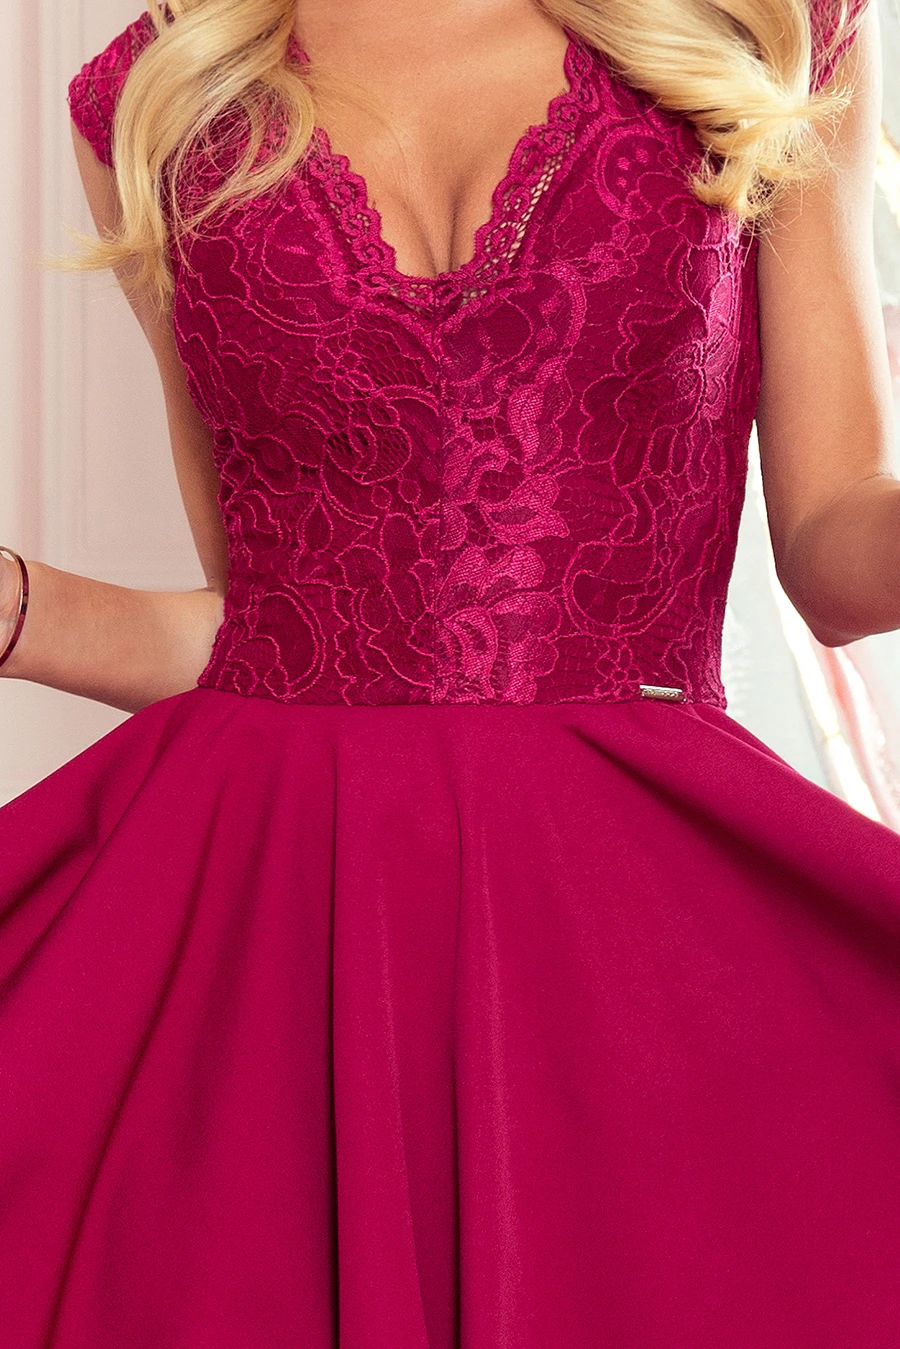 300-4 PATRICIA - dress with longer back with lace neckline - Burgundy color